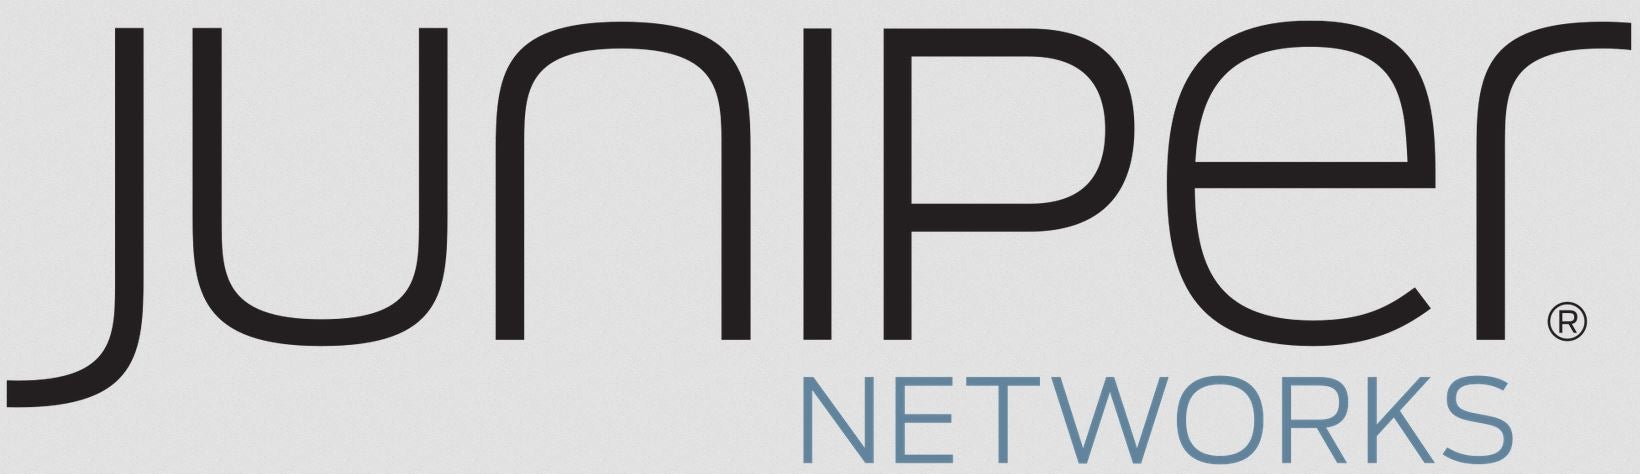 What is Juniper Networks?